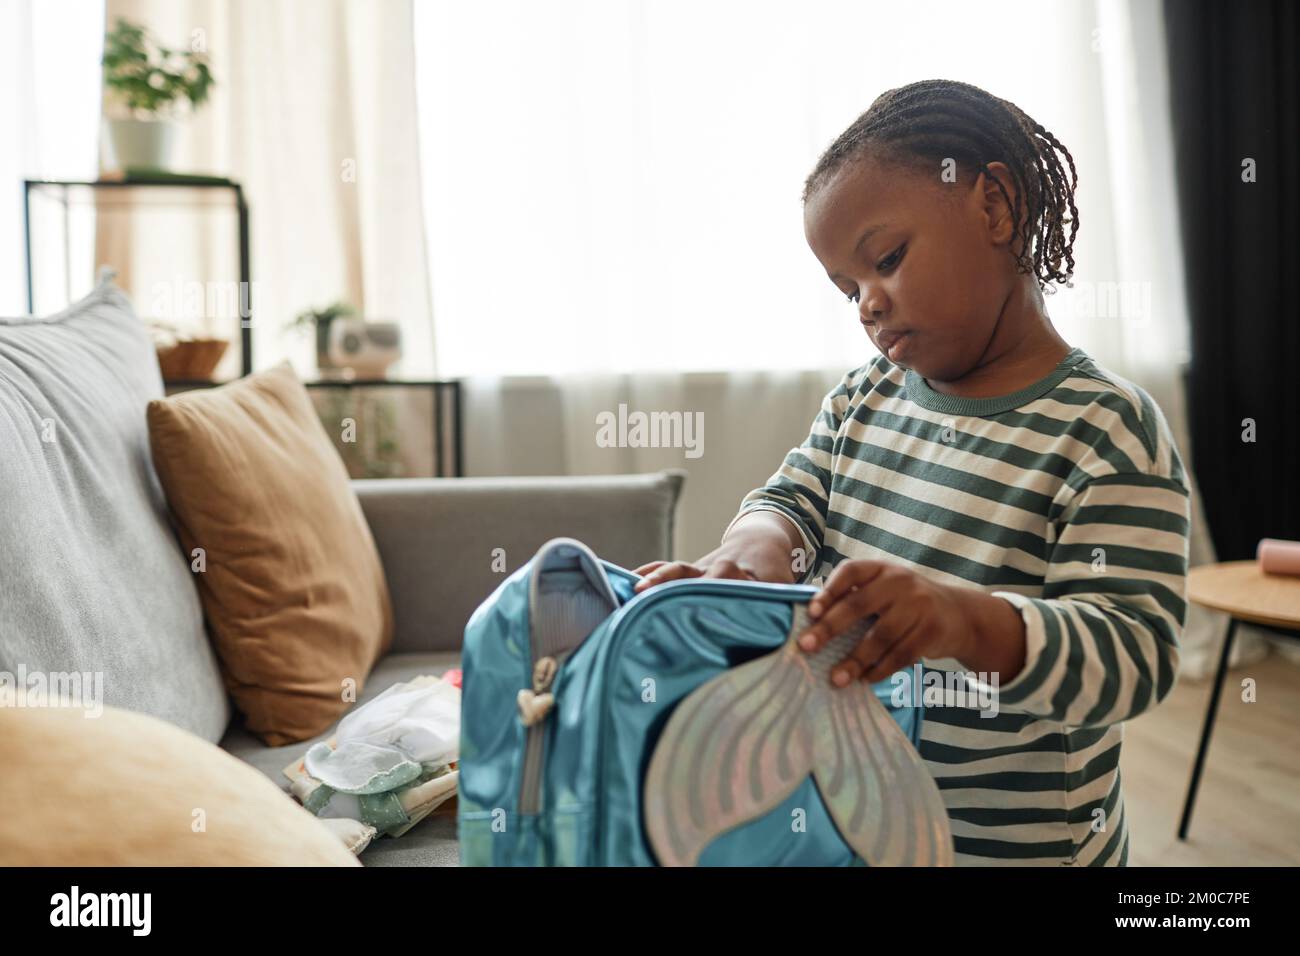 Portrait of cute black kid playing with toy bag in cozy home setting packing for nursery school, copy space Stock Photo